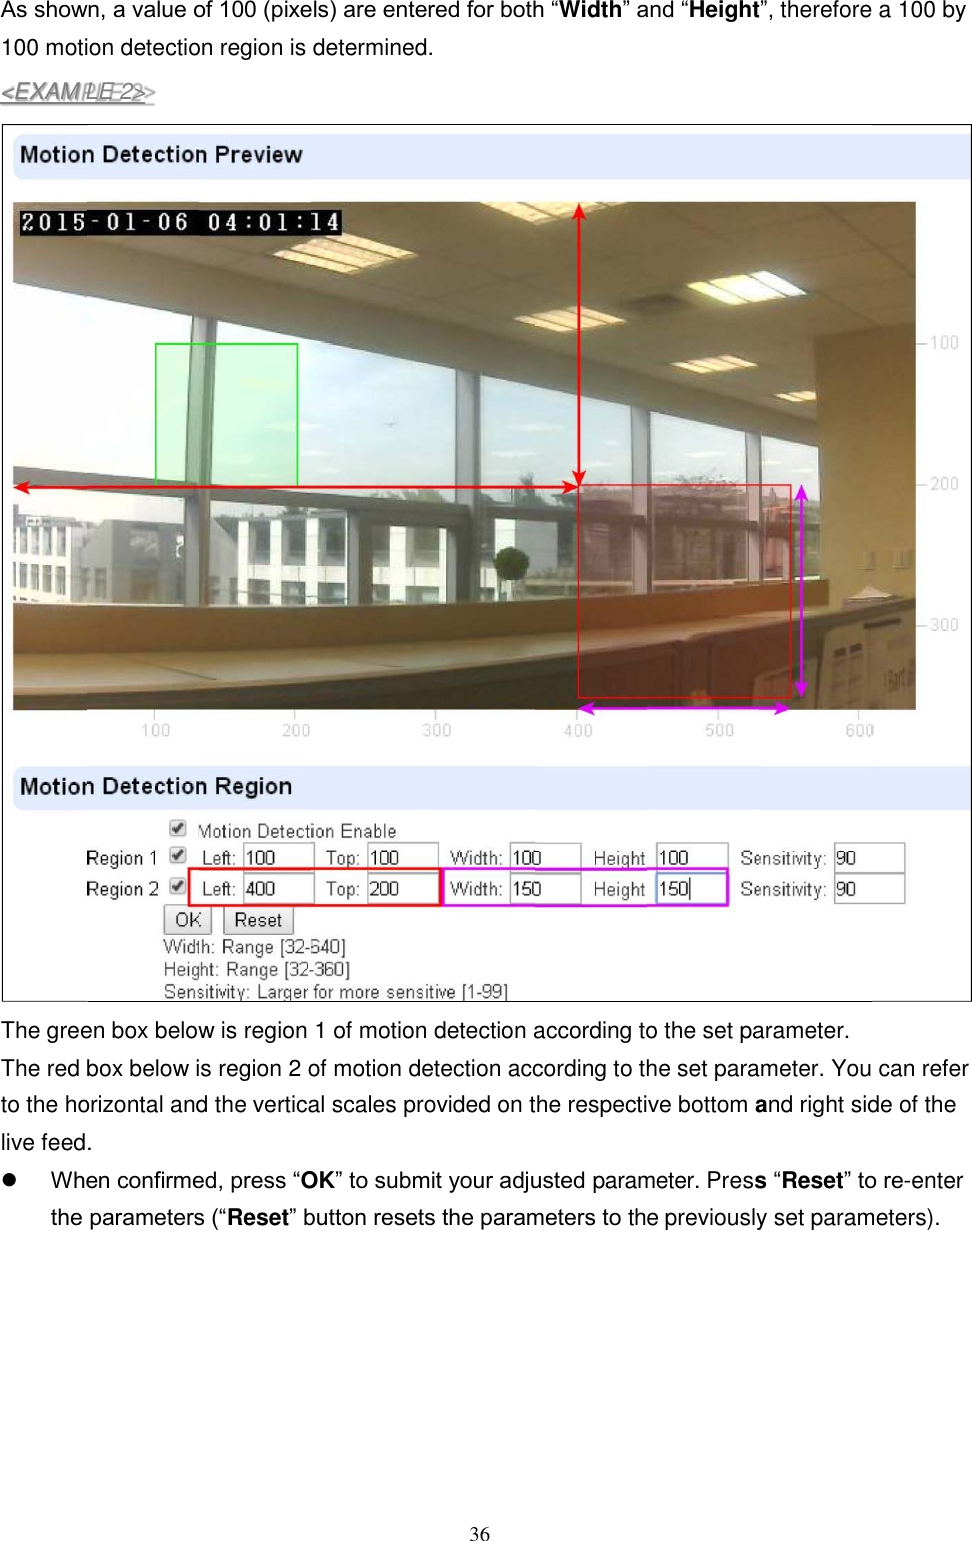 36  P As shown, a value of 100 (pixels) are entered for both “Width” and “Height”, therefore a 100 by 100 motion detection region is determined.  The green box below is region 1 of motion detection according to the set parameter. The red box below is region 2 of motion detection according to the set parameter. You can refer to the horizontal and the vertical scales provided on the respective bottom and right side of the live feed.  When confirmed, press “OK” to submit your adjusted parameter. Press “Reset” to re-enter the parameters (“Reset” button resets the parameters to the previously set parameters).&lt;EXAM LE 2&gt; 